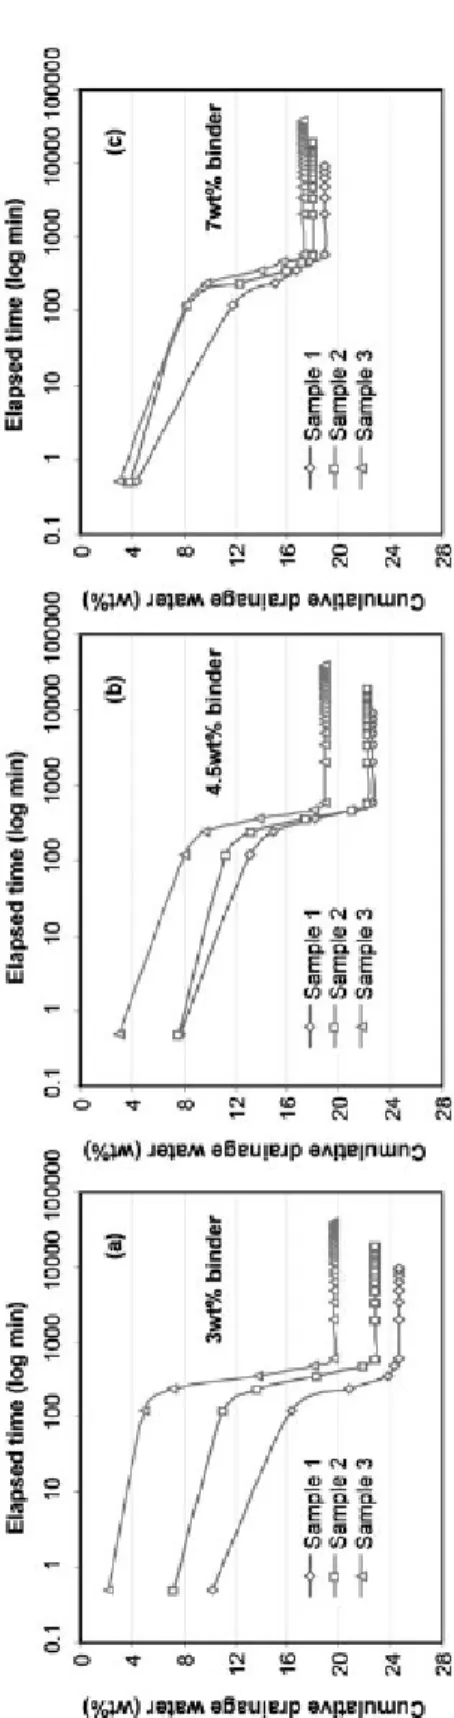 Fig. 3. Evolution of CPB drainage water a) 3 wt%, b) 4.5 wt%, and c) 7 wt% binder content Rys